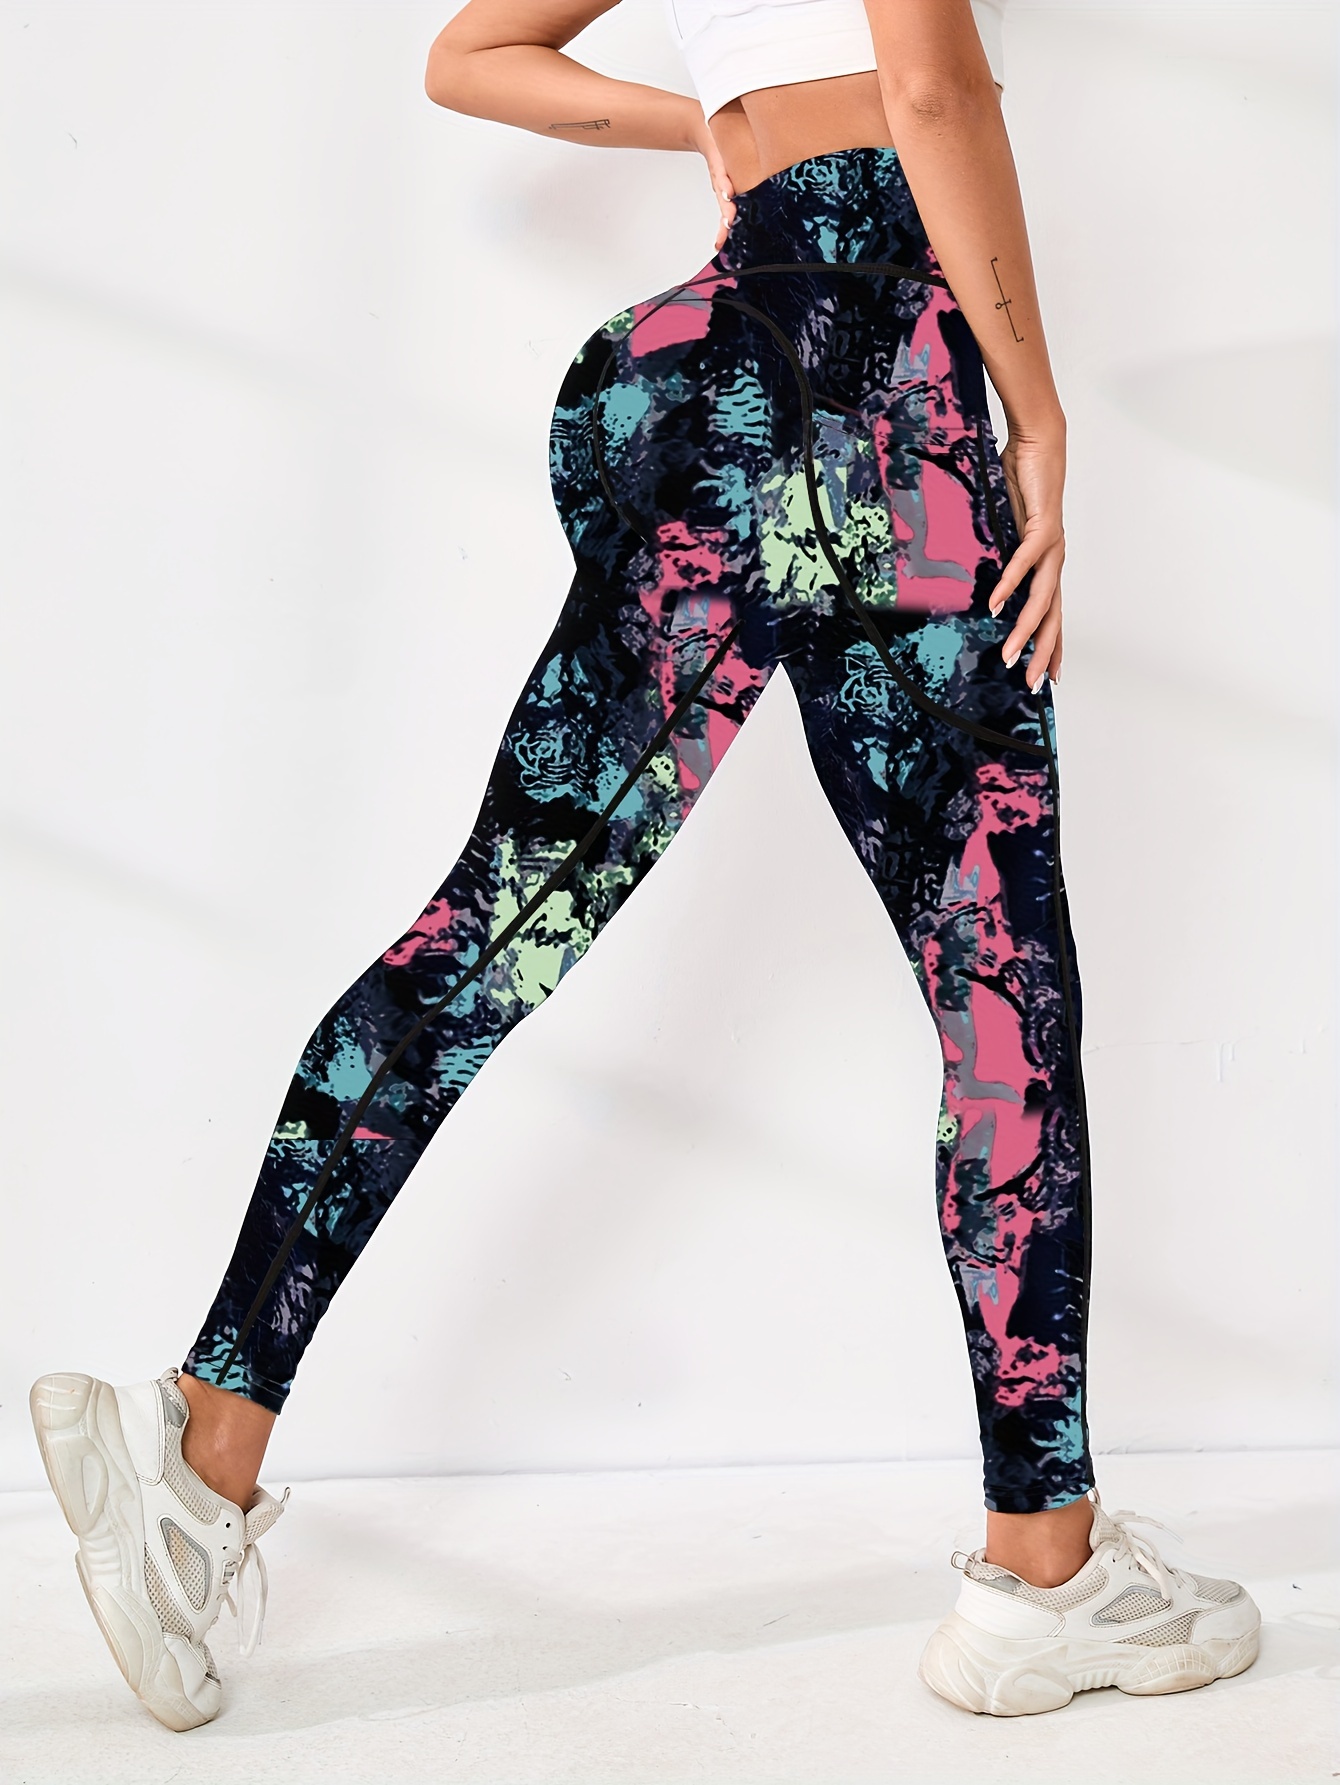 Women Multicoloured High-Waist Printed Leggings With Pockets